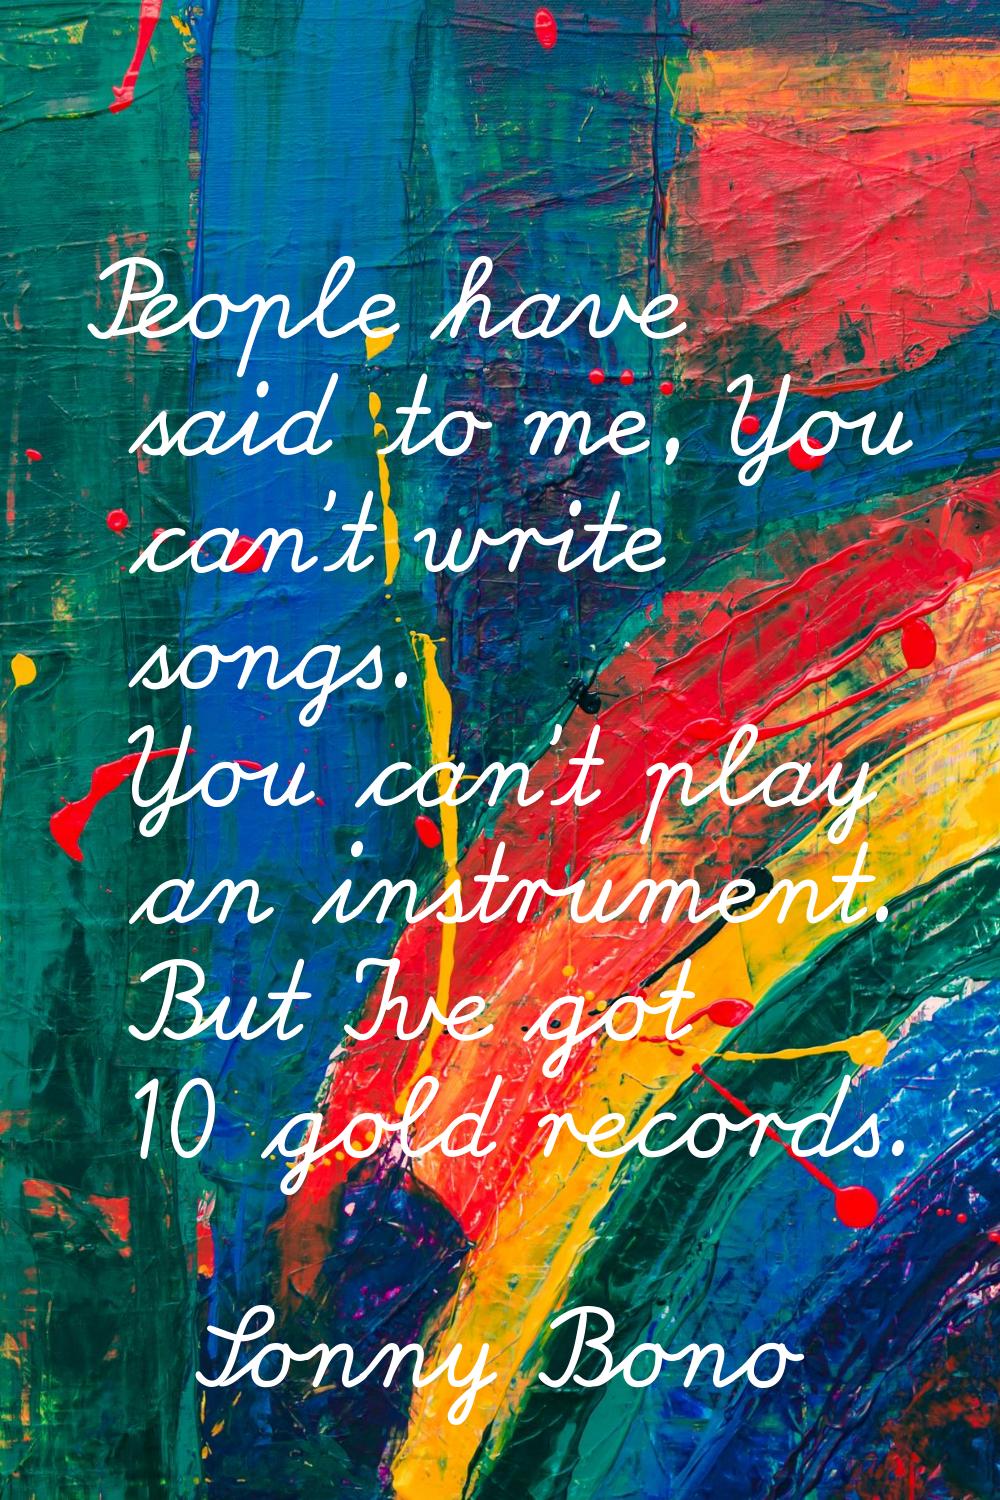 People have said to me, You can't write songs. You can't play an instrument. But I've got 10 gold r